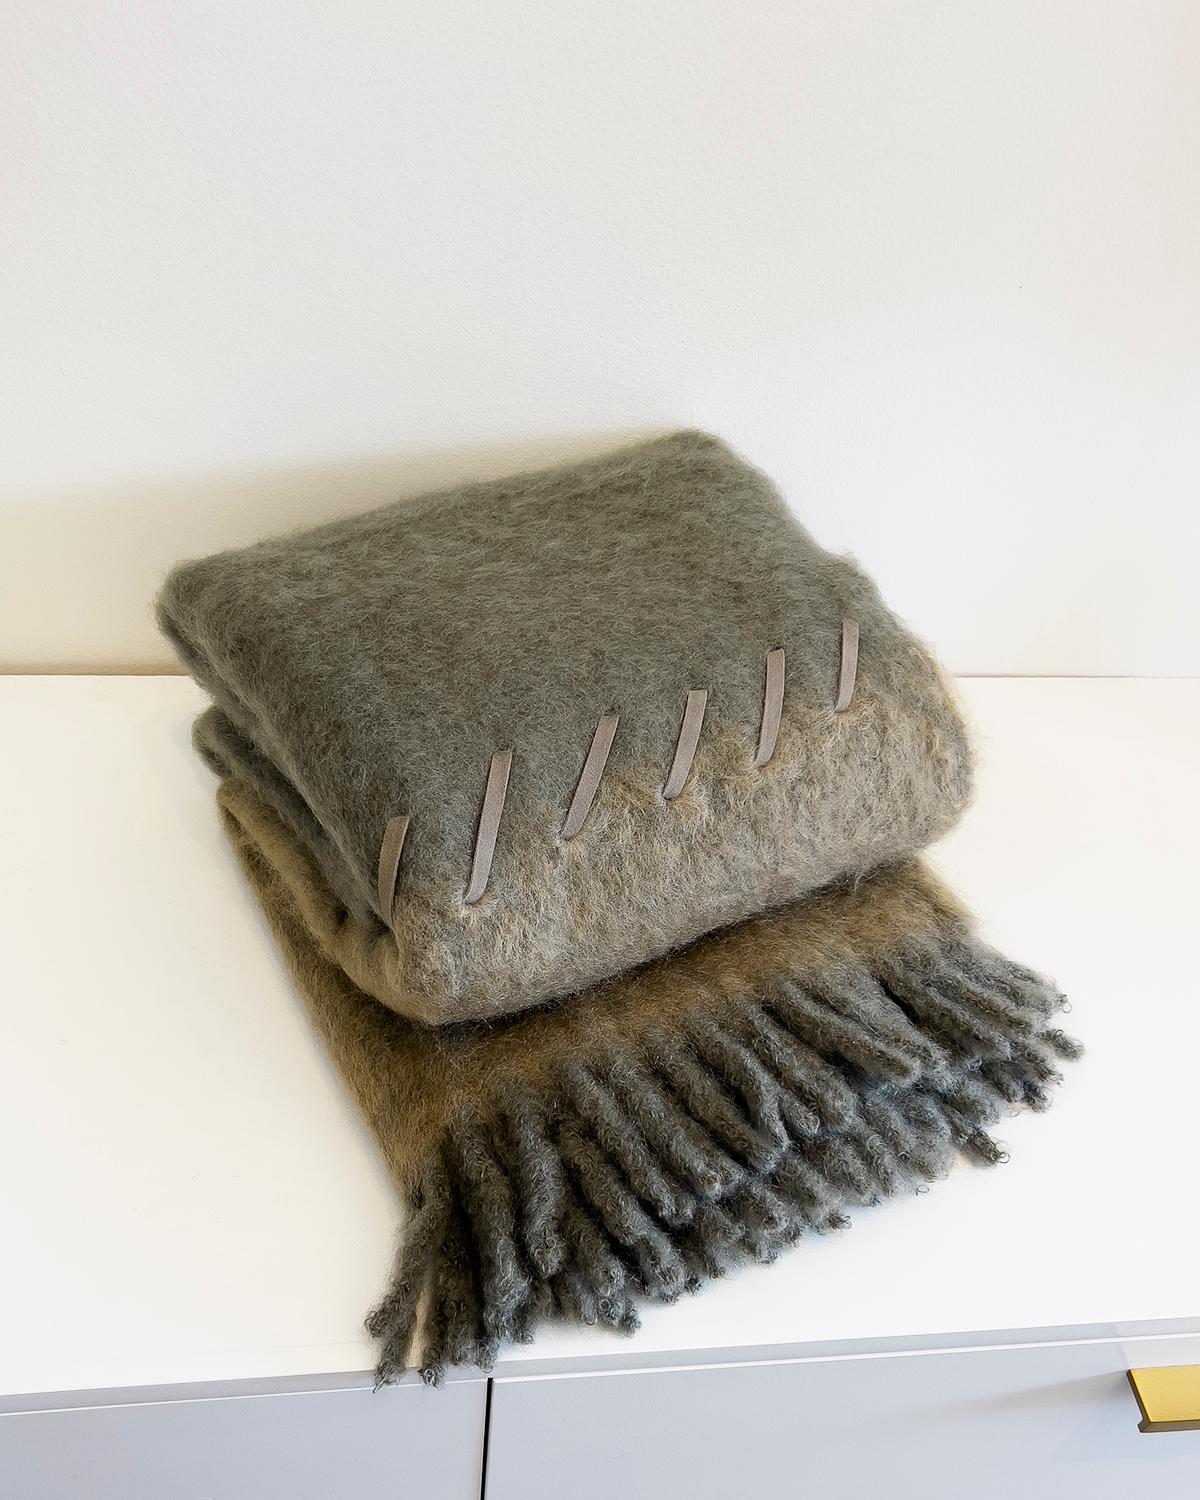 Spanish Mantas Ezcaray Sage and Moss Green Mohair Blanket Throw w/ Suede Whipstitch For Sale